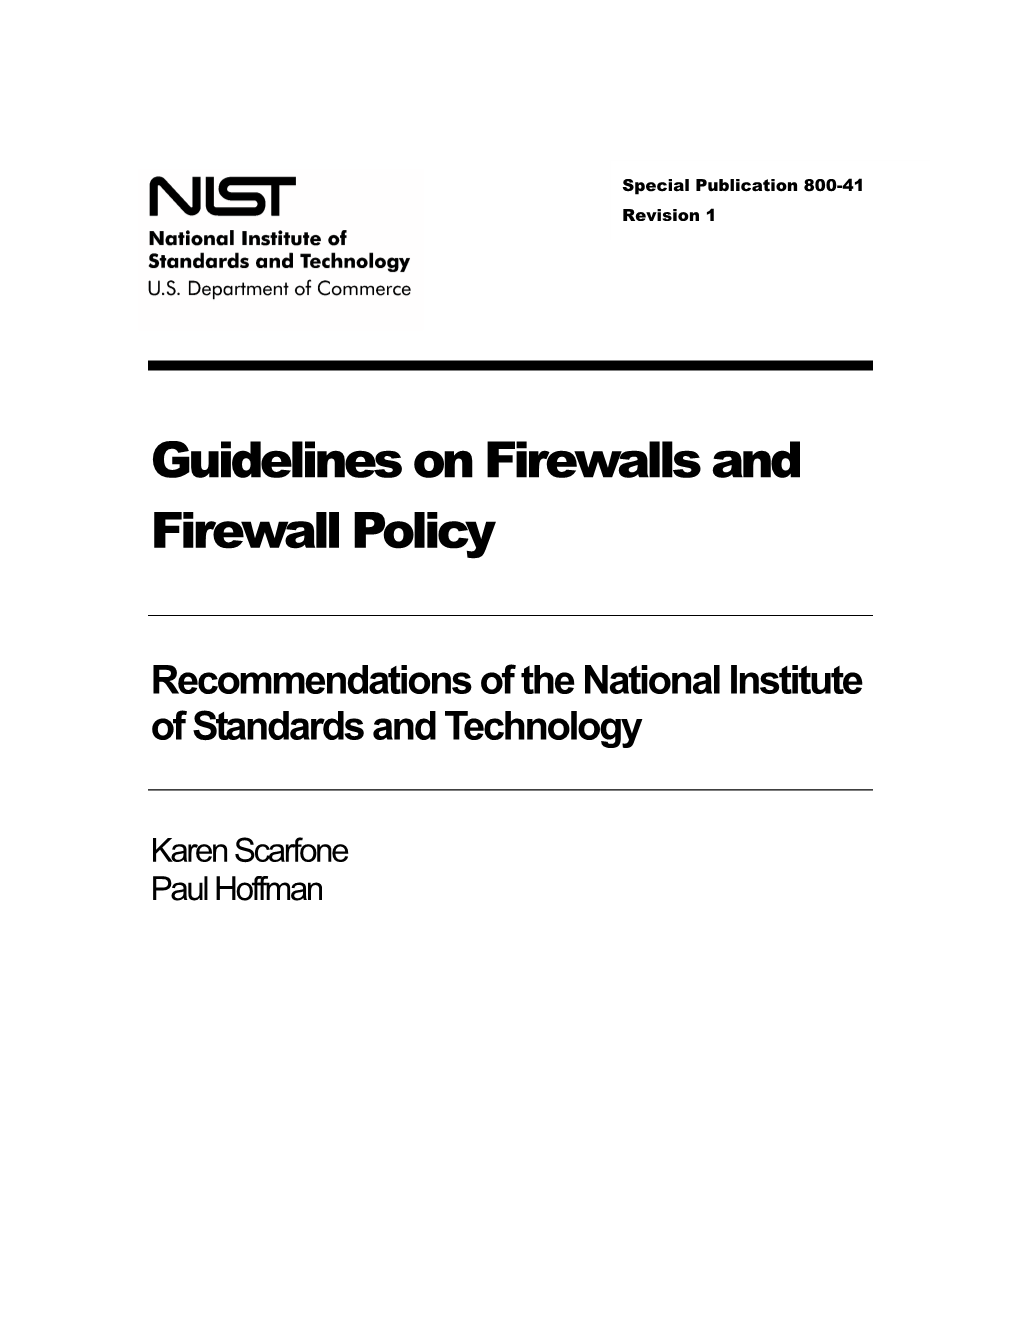 NIST SP 800-41, Revision 1, Guidelines on Firewalls And